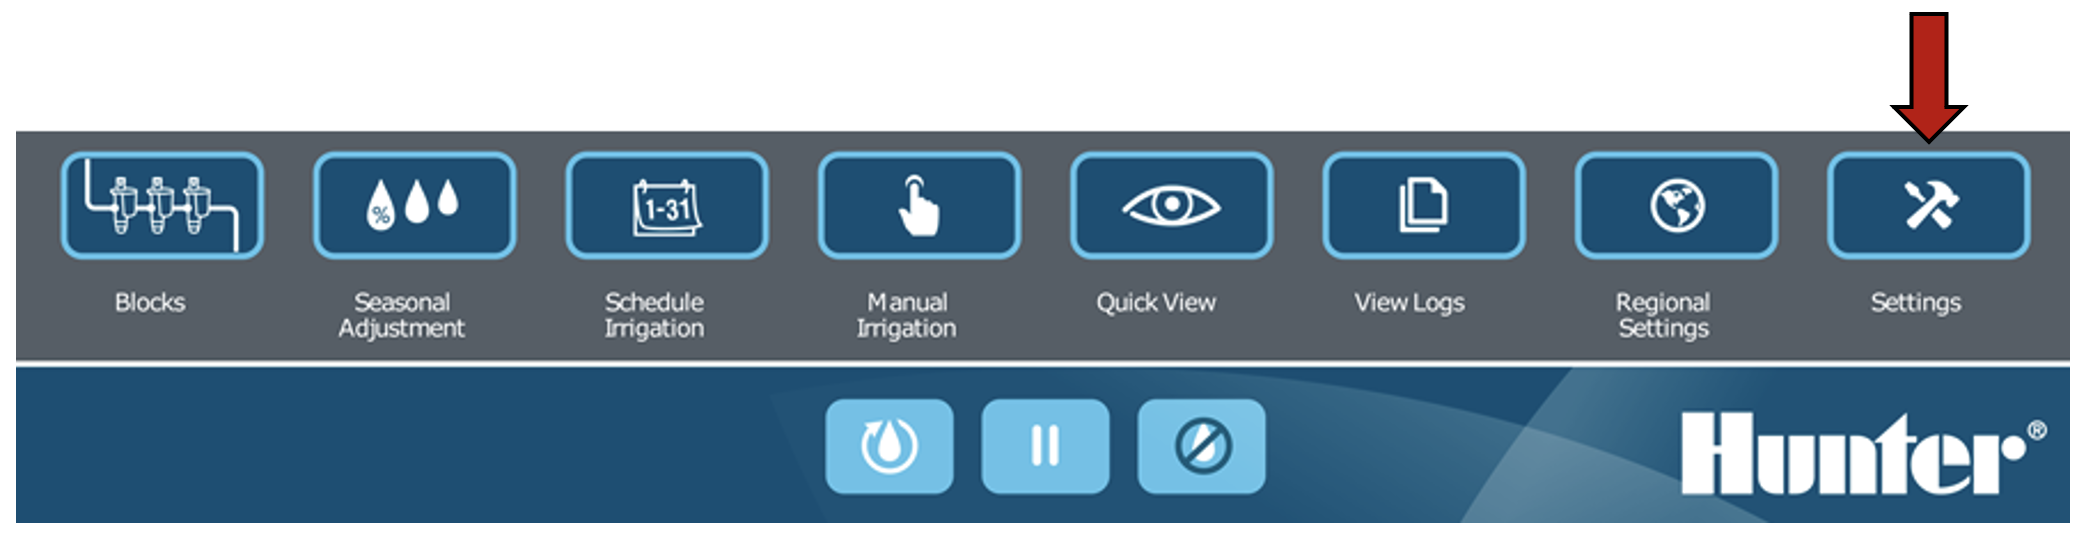 Image of the interface showing the Settings button selected.